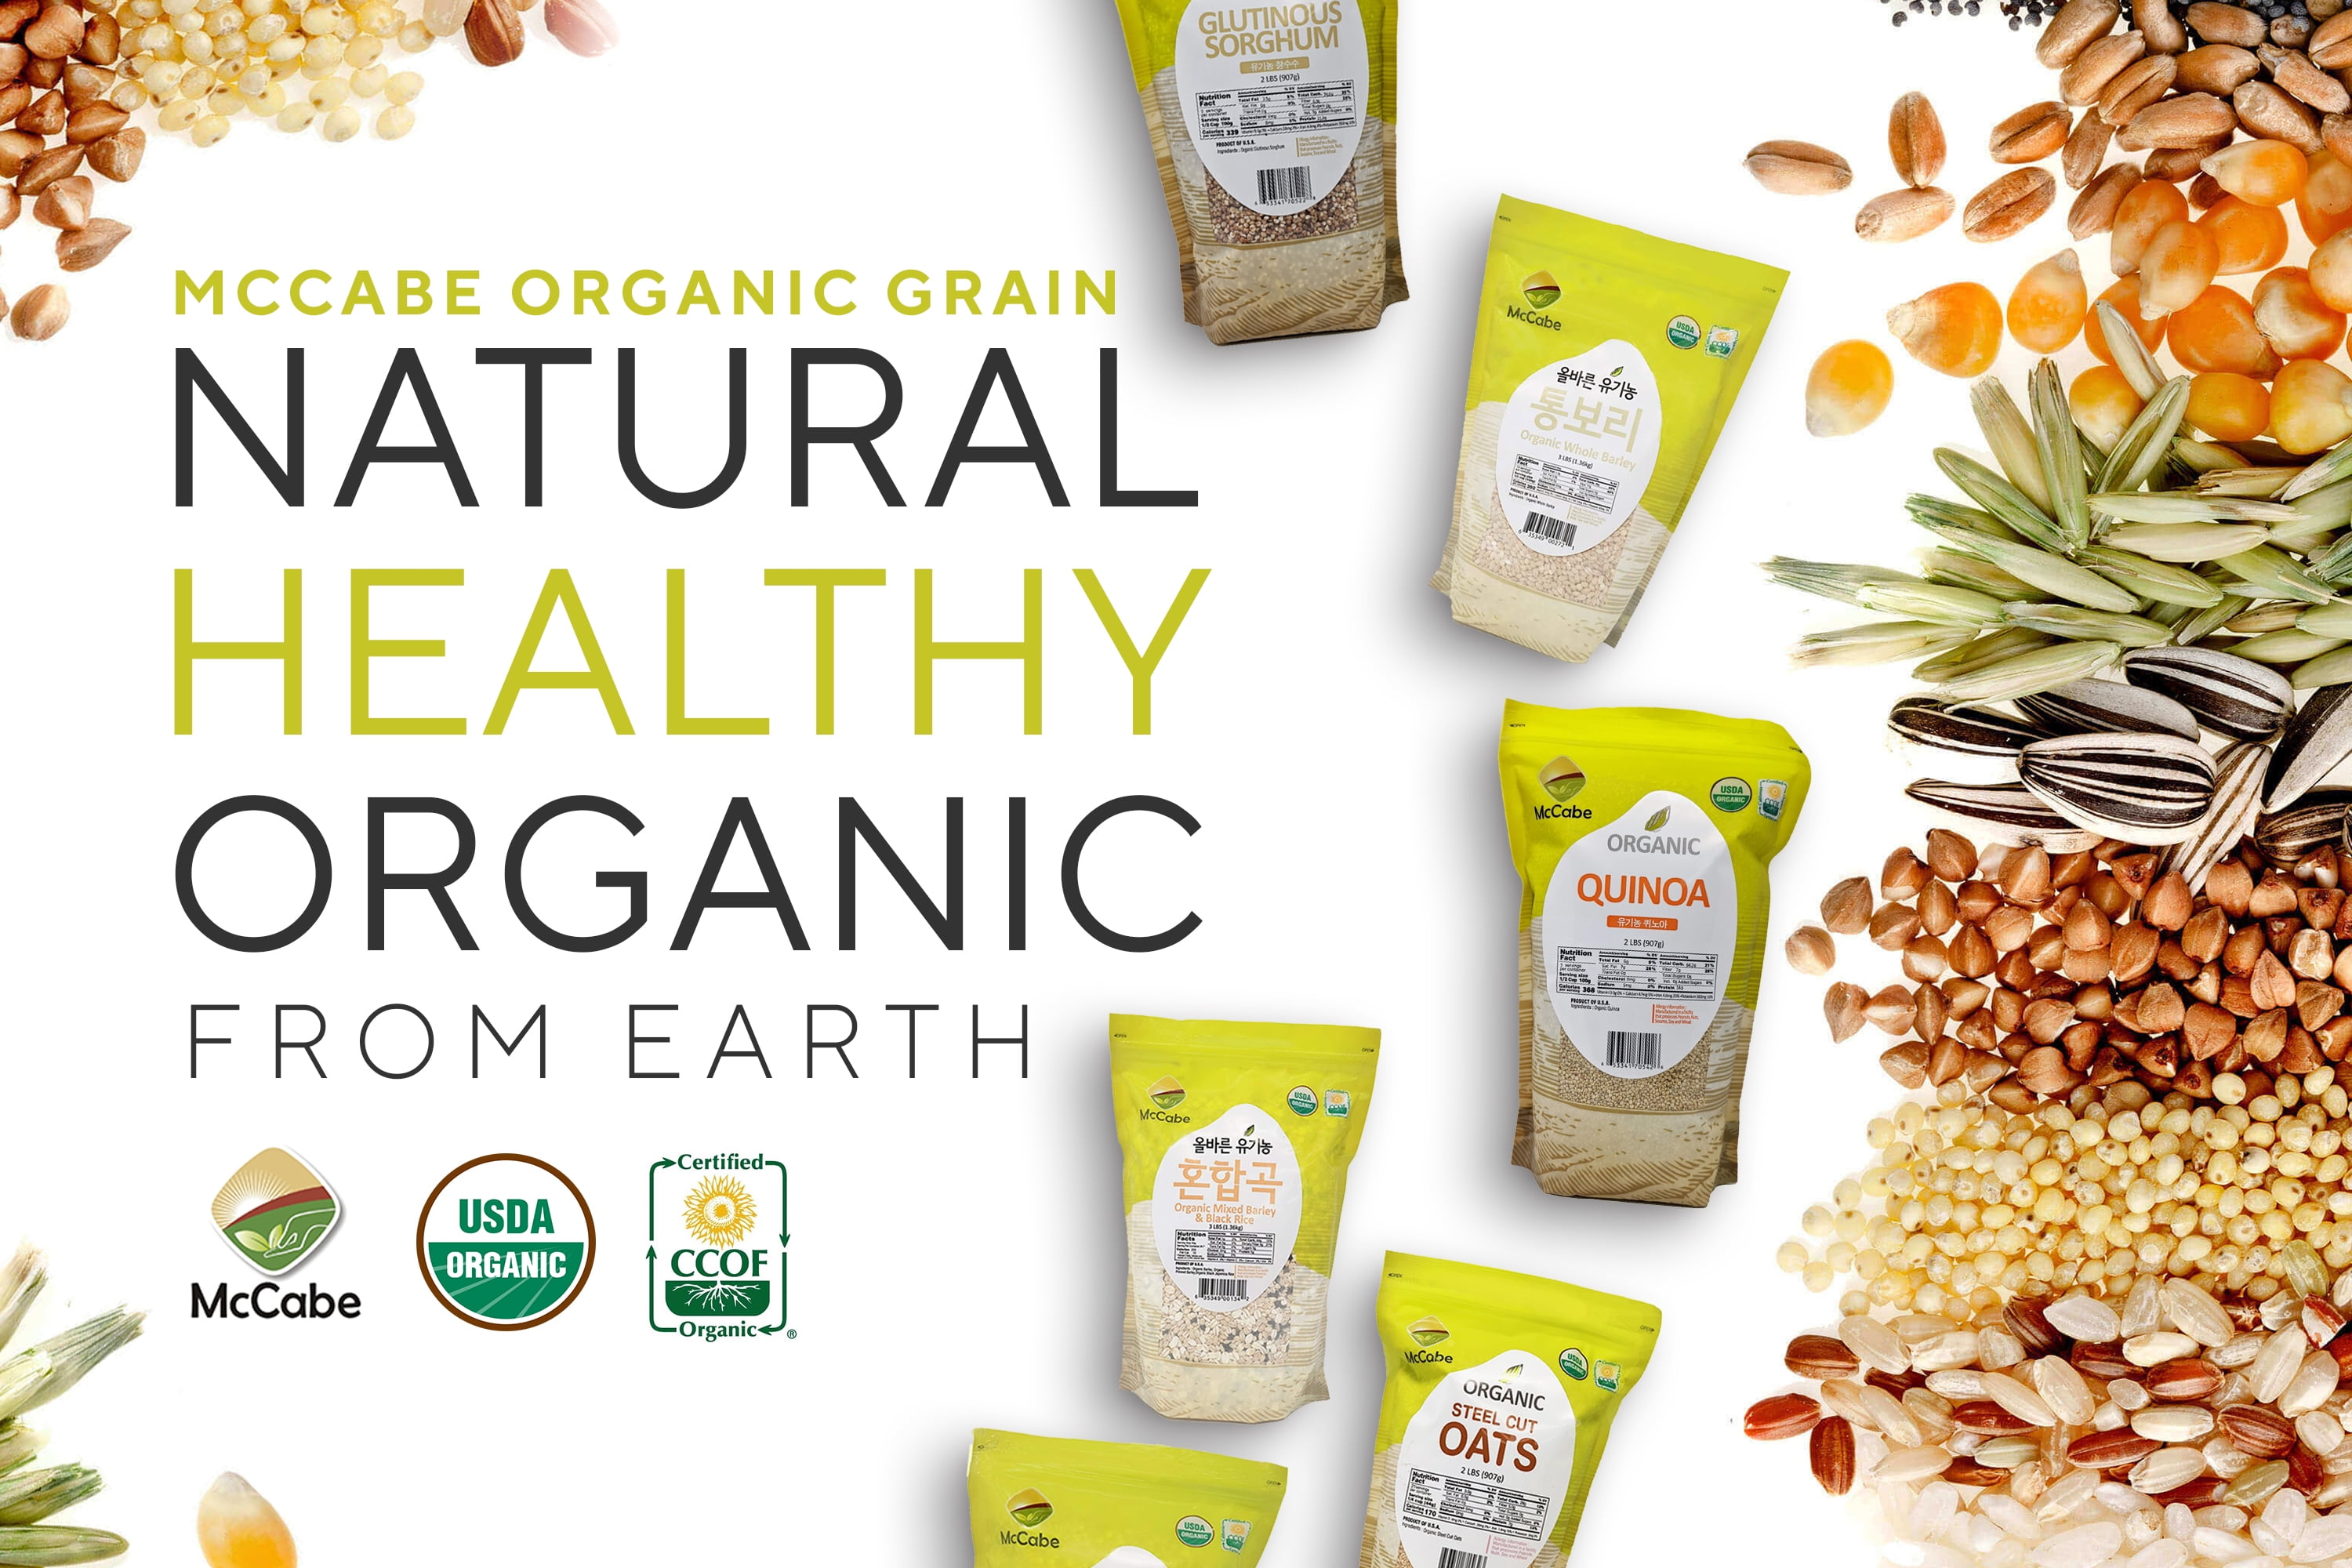 ORGANIC OATS, regular/thick rolled – Essential Organic Ingredients